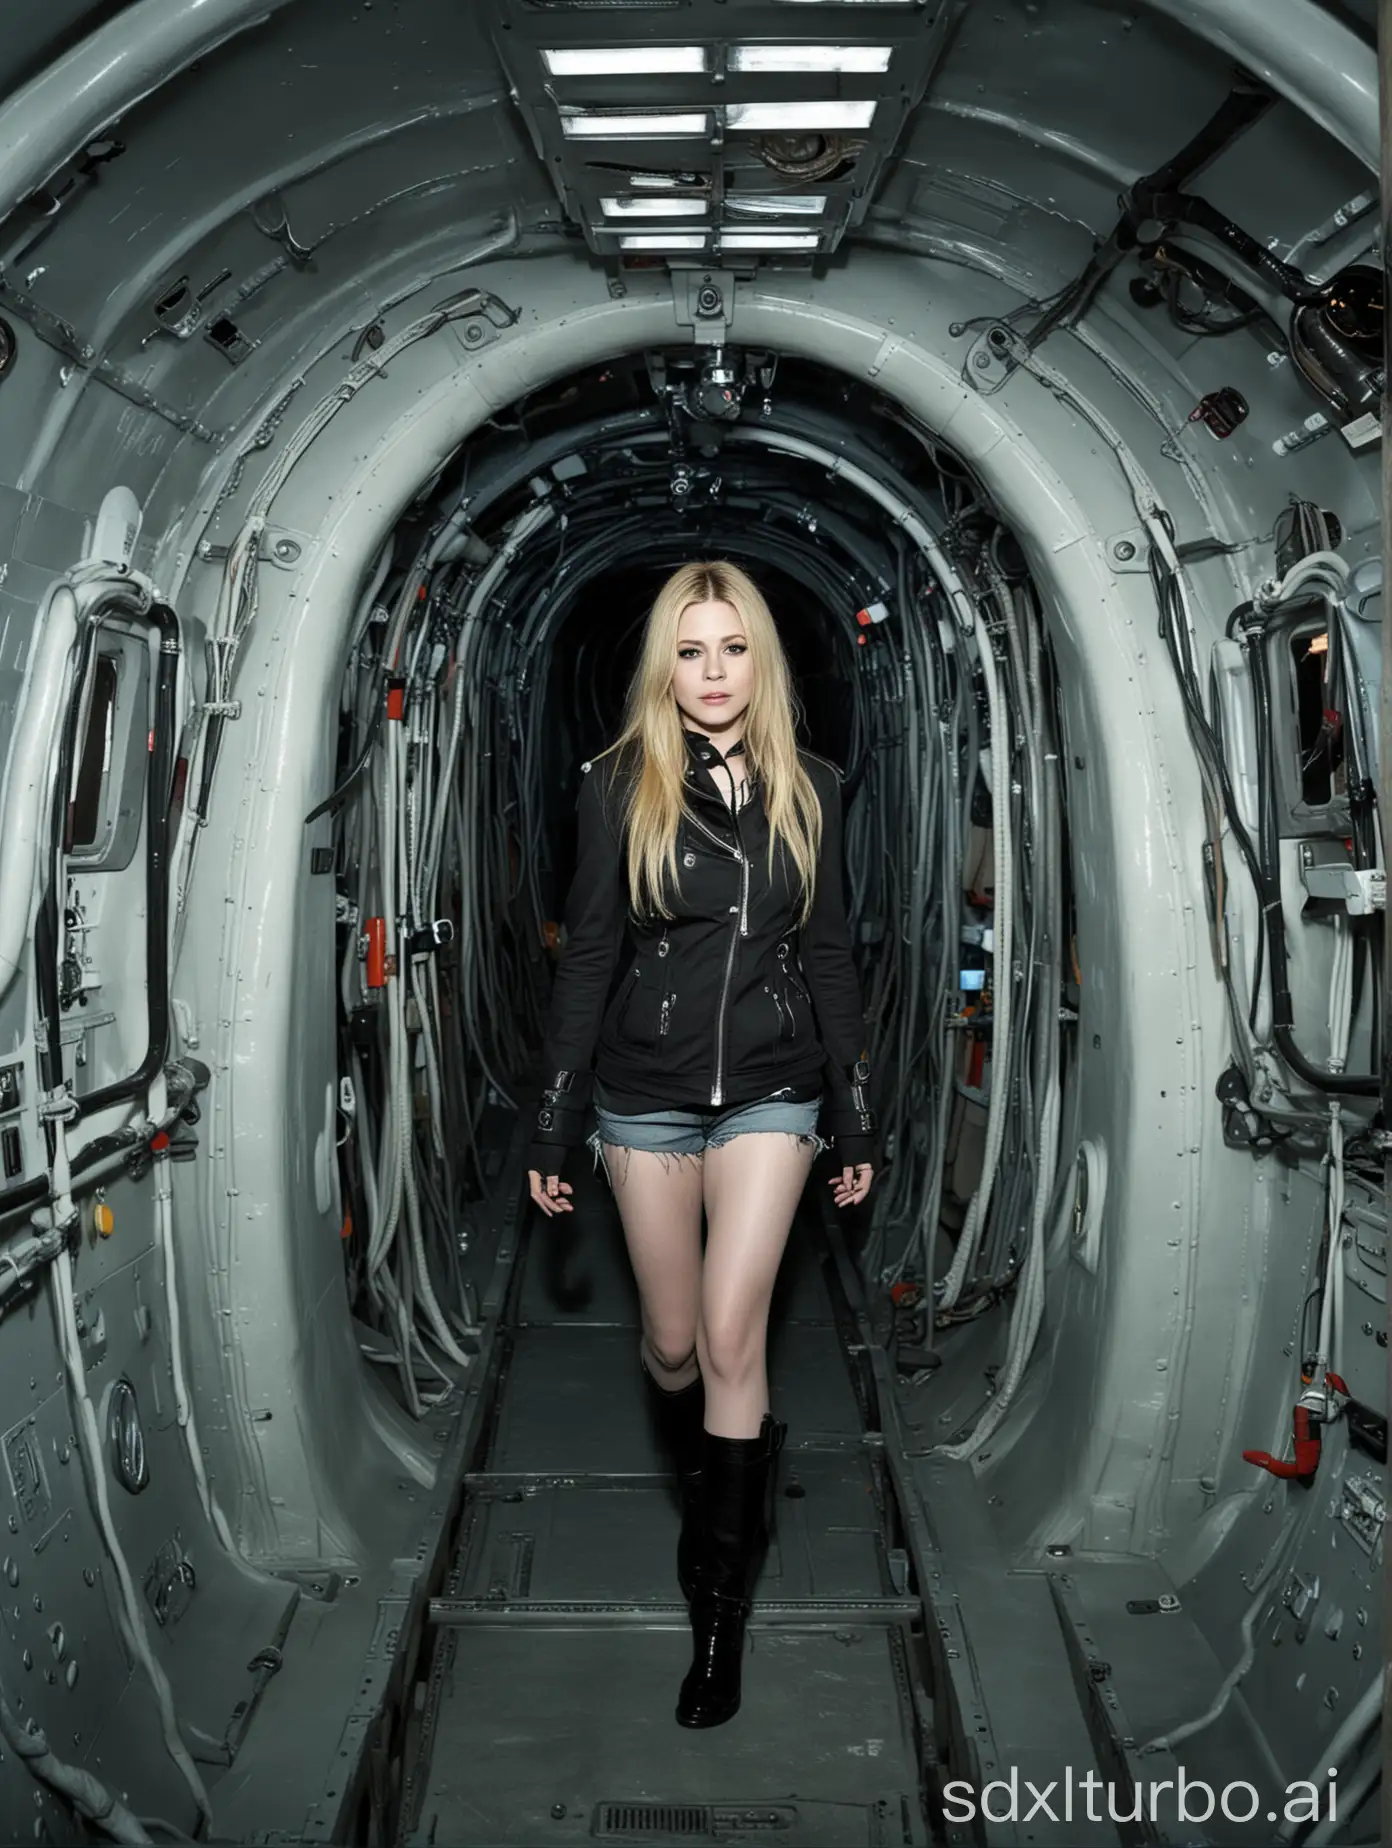 Avril Lavigne modeling with sexy clothes inside a submarine